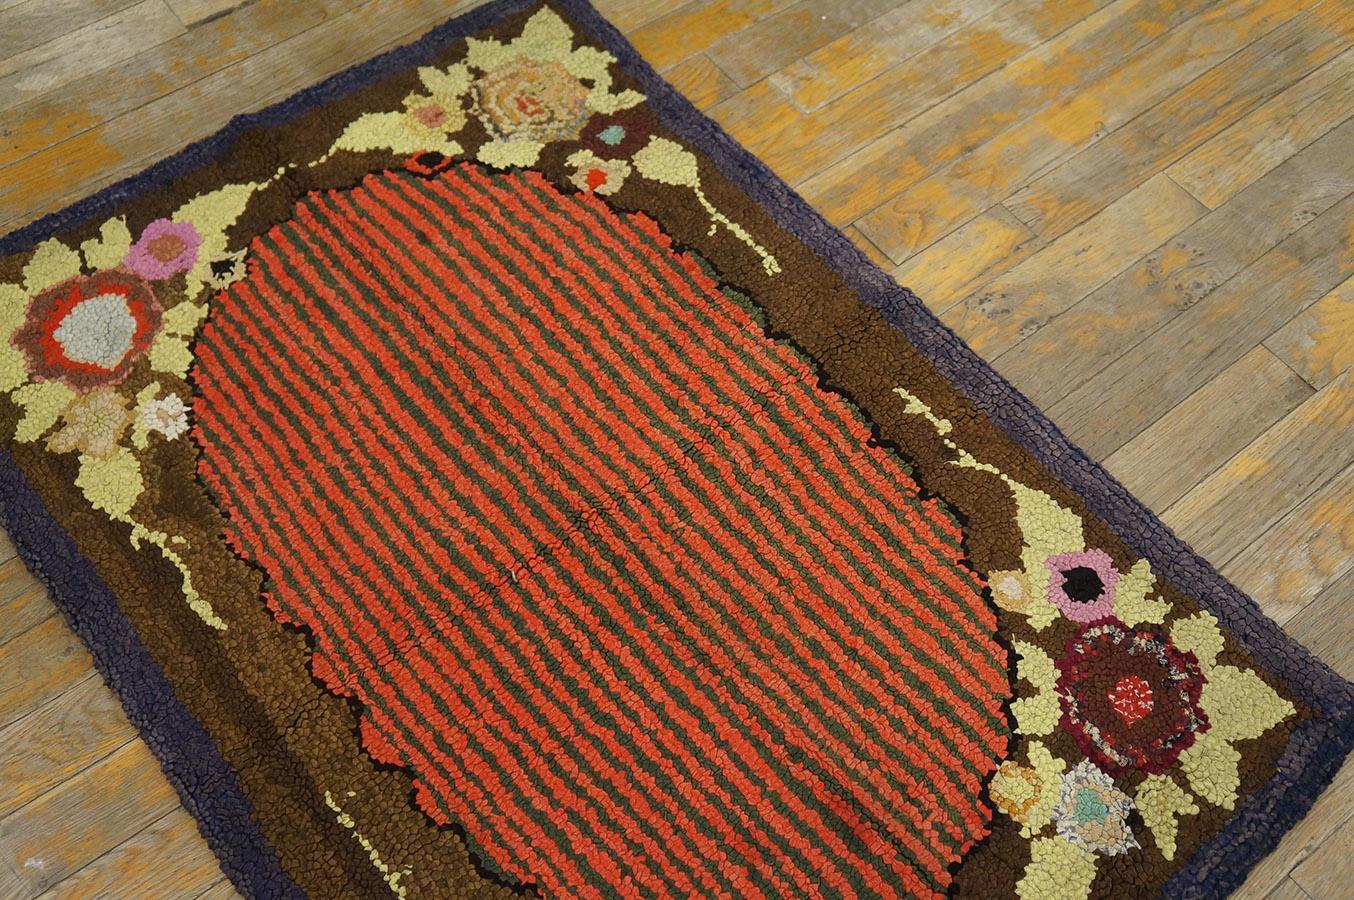 Early 20th Century American Hooked Rug ( 2'3